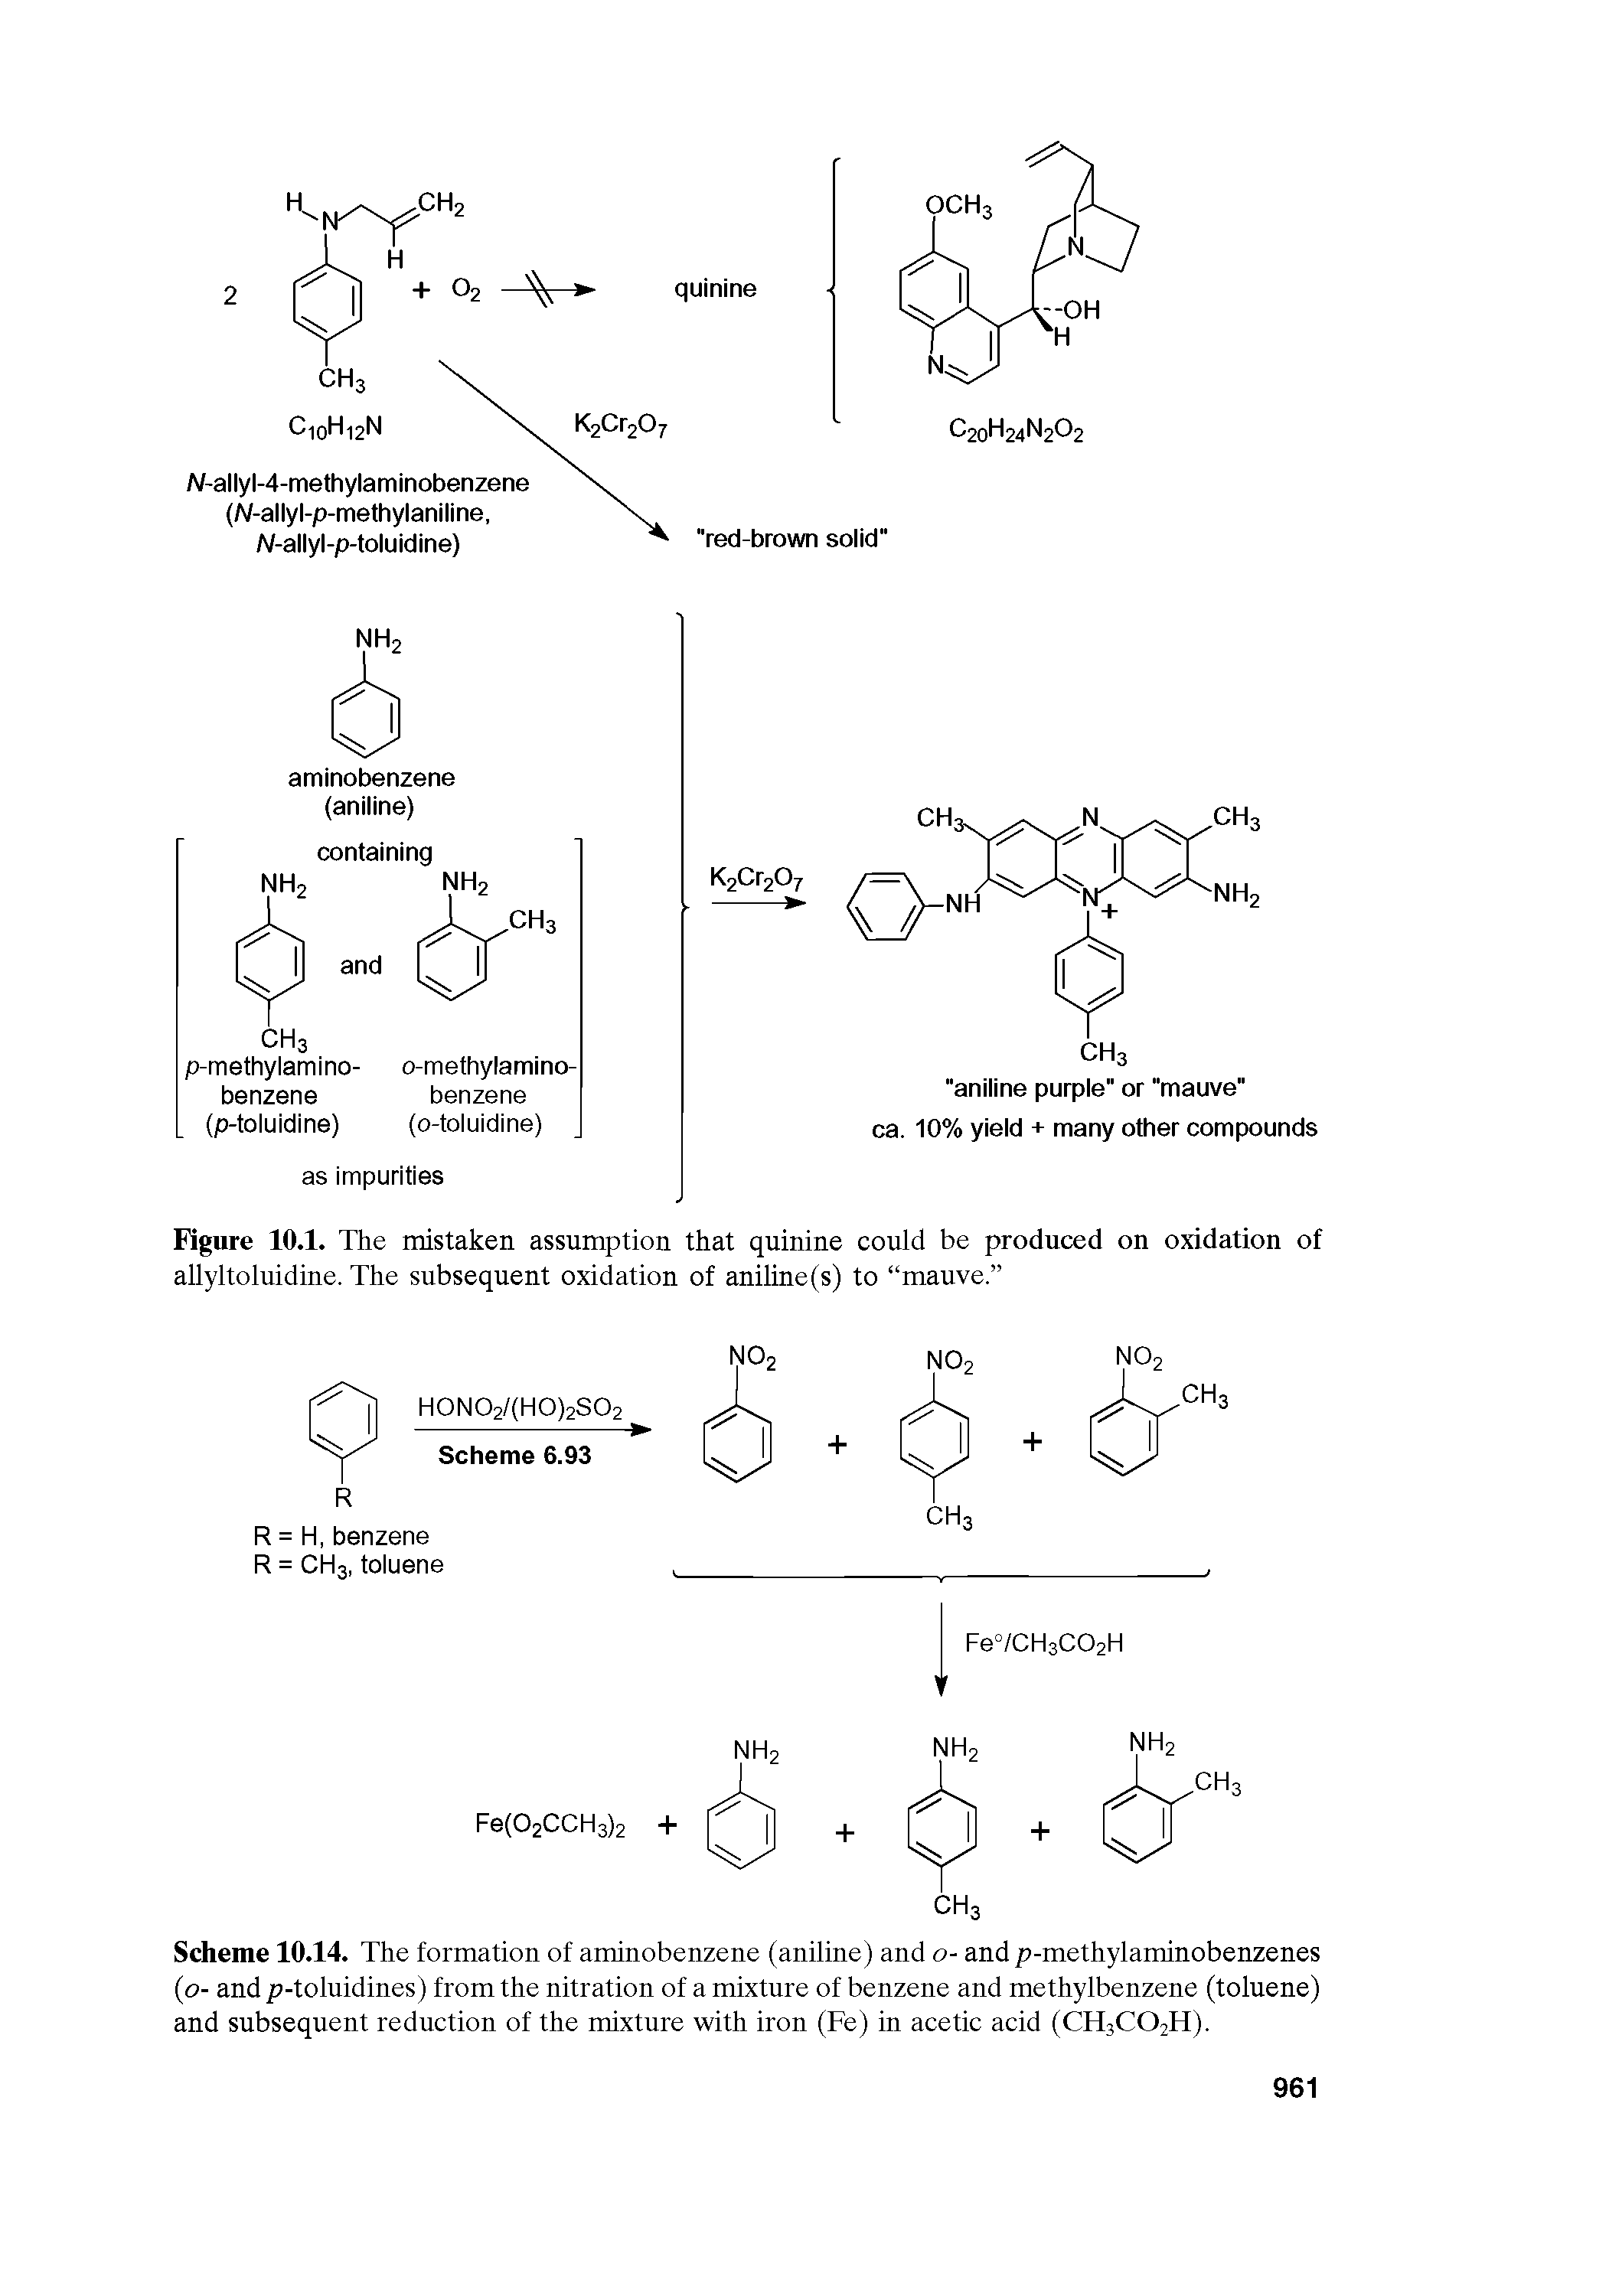 Scheme 10.14. The formation of aminobenzene (aniline) and o- and p-methylaminobenzenes (o- and p-toluidines) from the nitration of a mixture of benzene and methylbenzene (toluene) and subsequent reduction of the mixture with iron (Fe) in acetic acid (CH3CO2H).